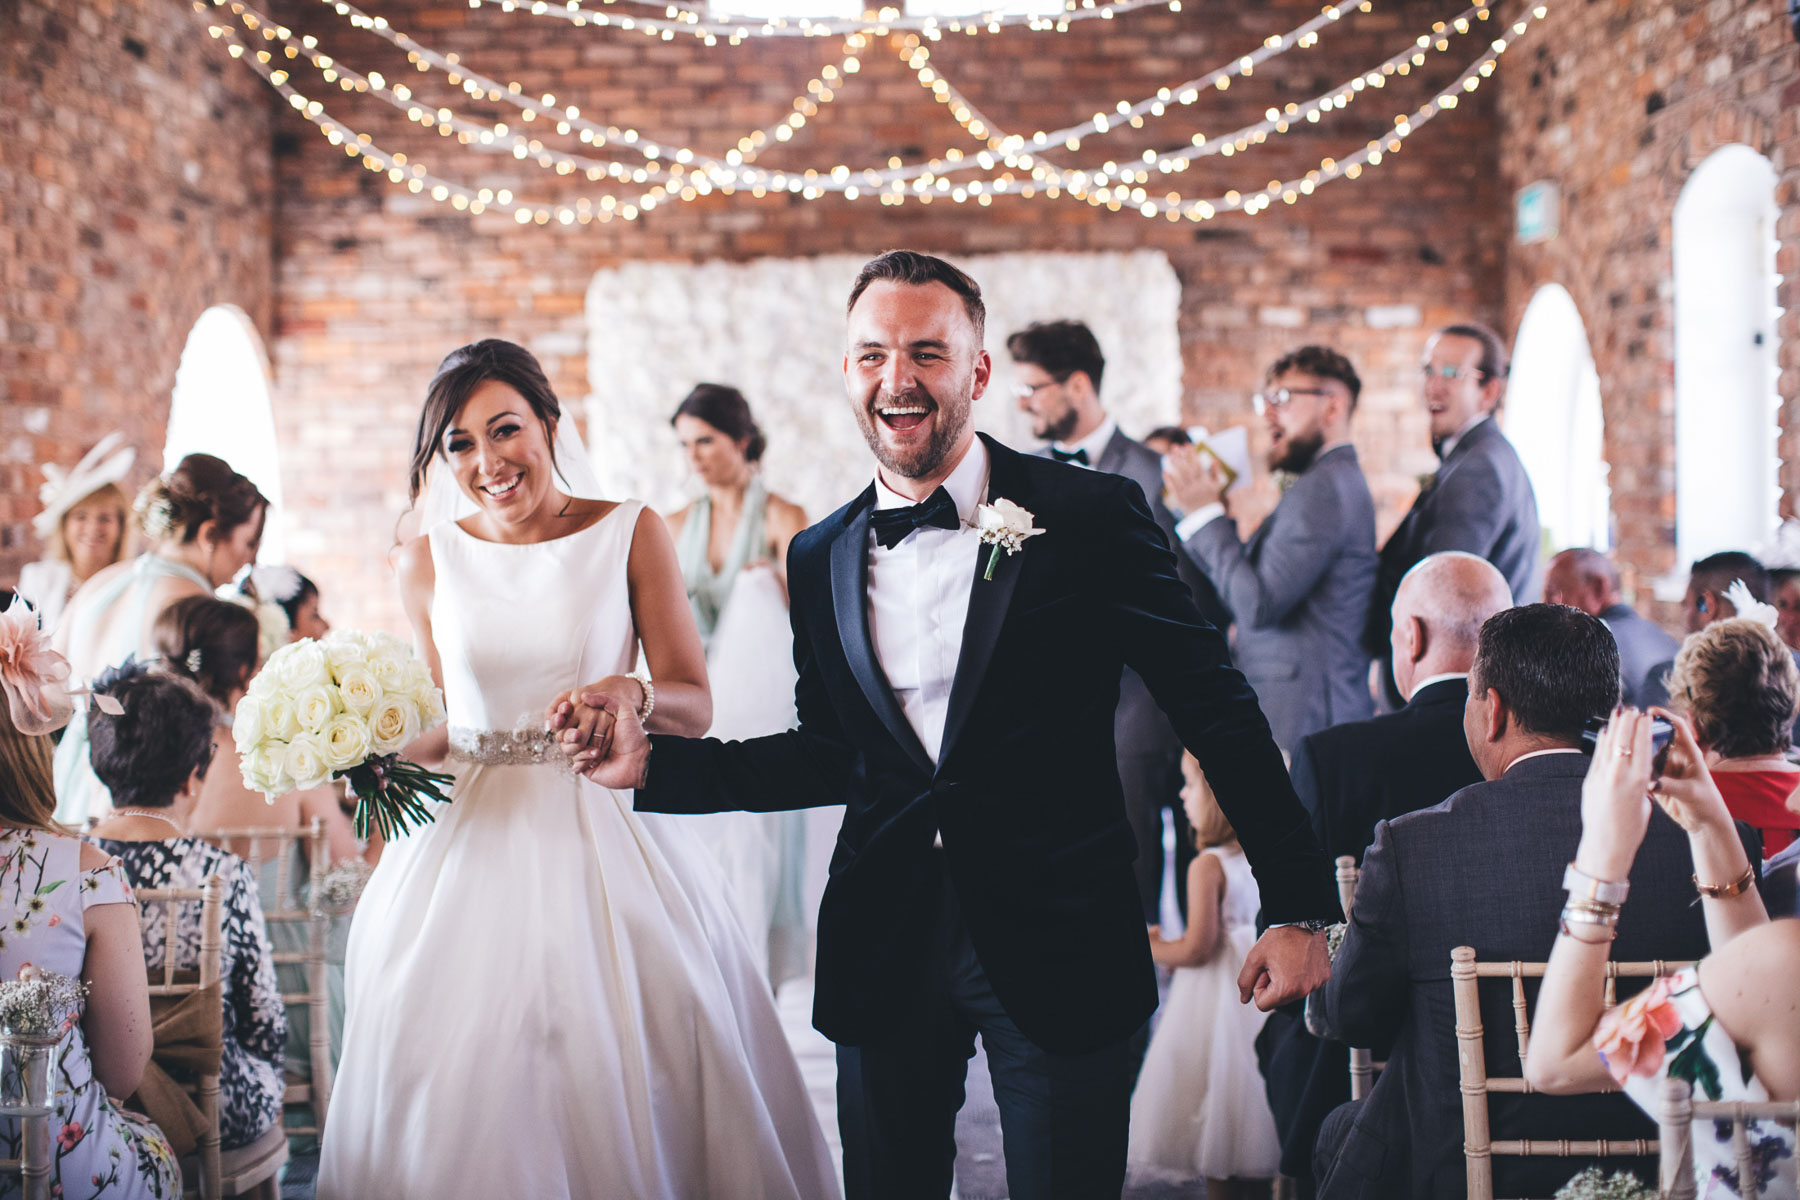 couple walk down the aisle very happy after their wedding ceremony